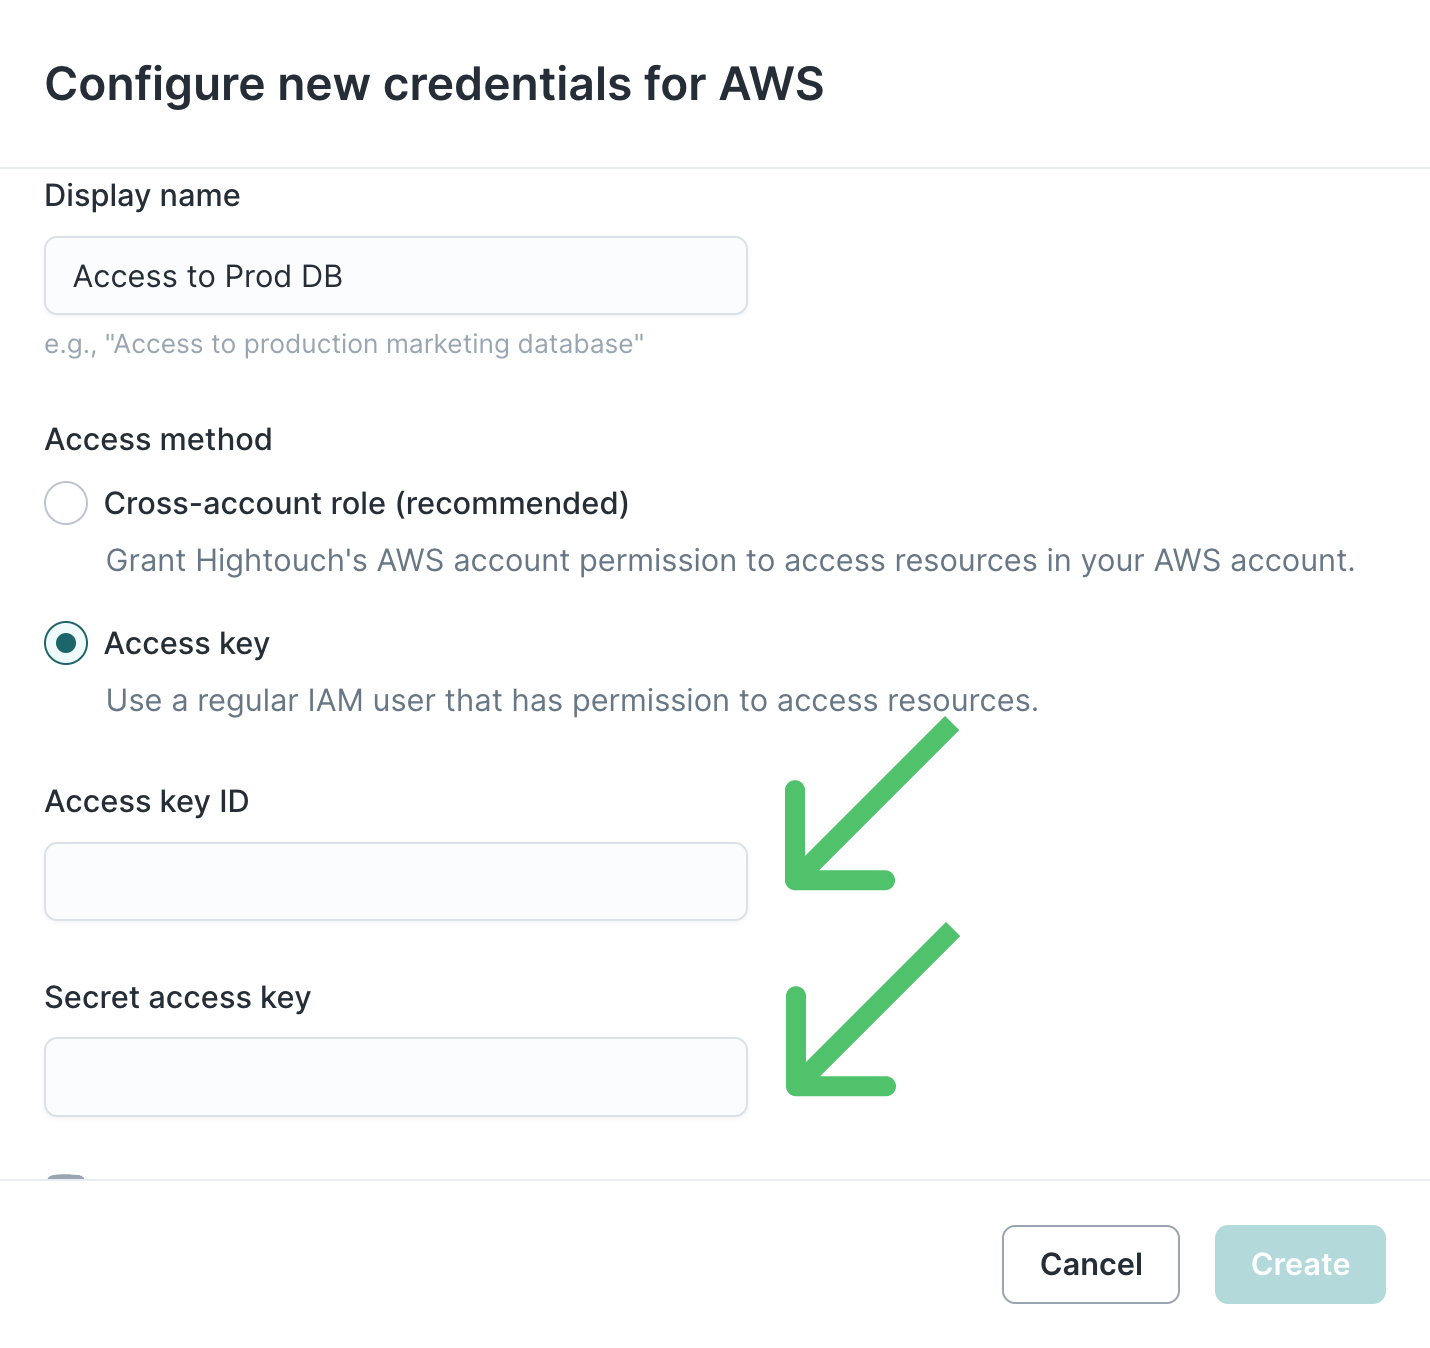 Role creation in the AWS console